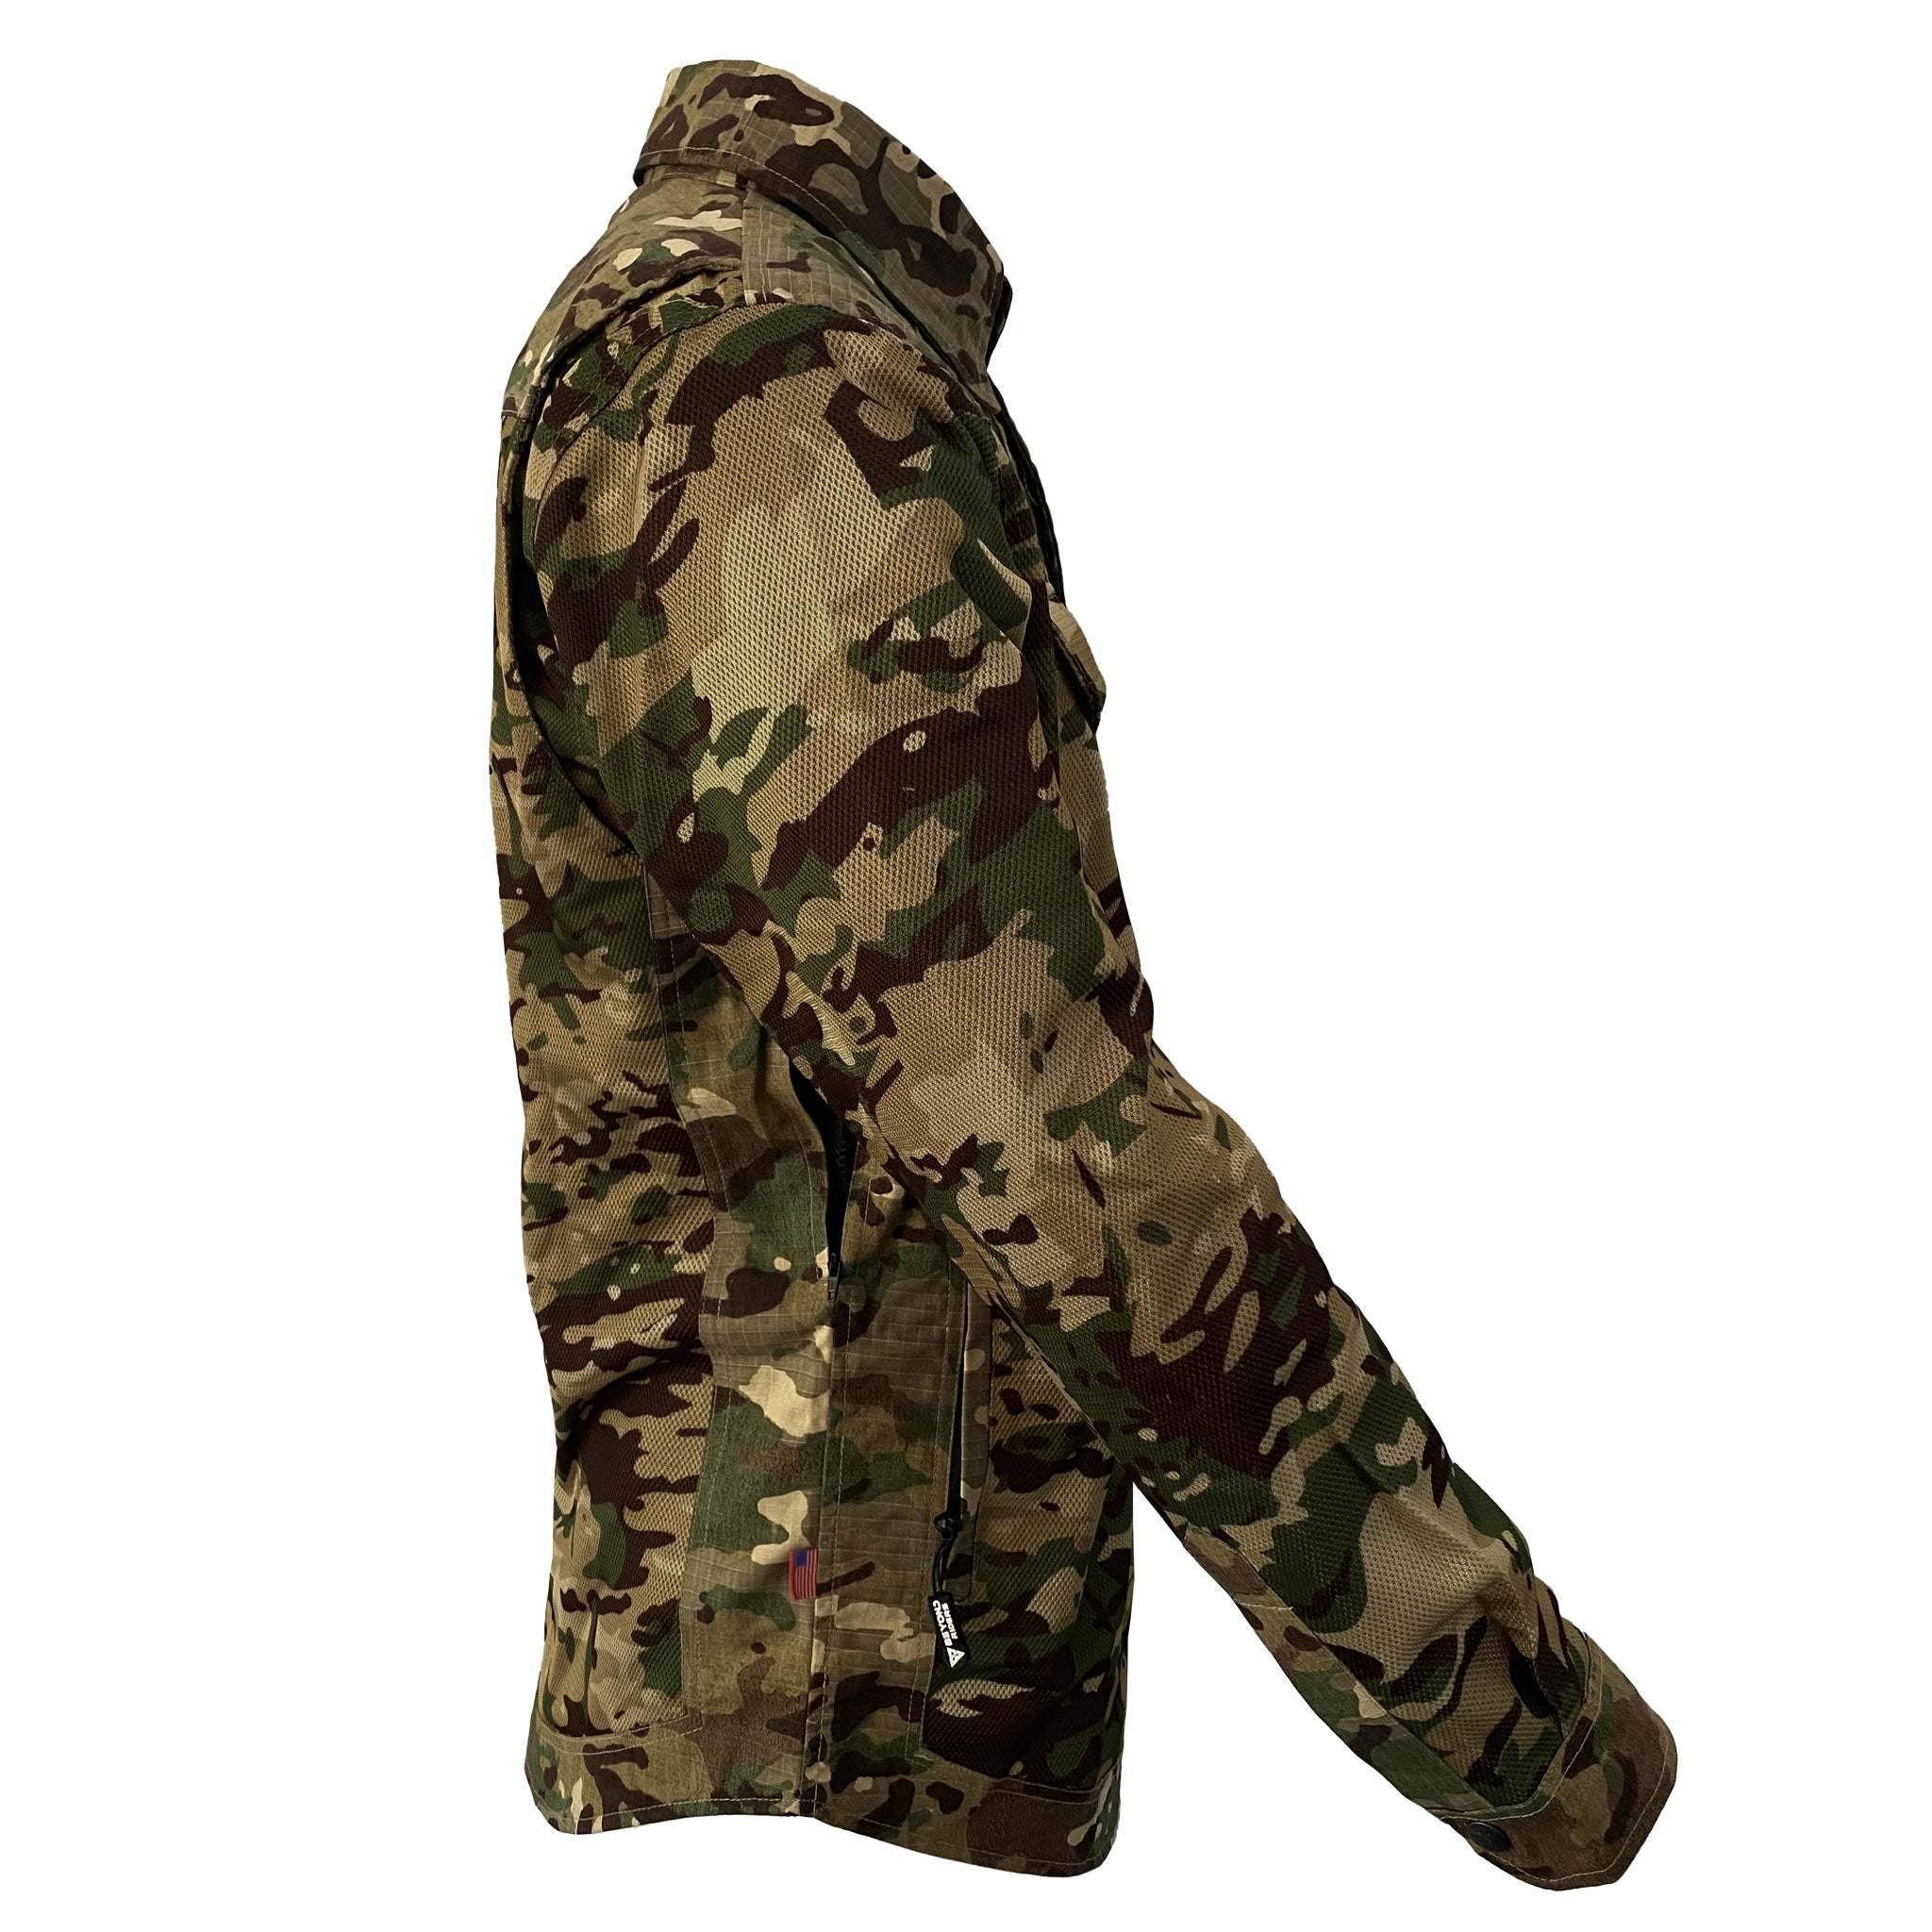 Summer Mesh Protective Camouflage Shirt “Delta Four” - Light Camouflage  ‌